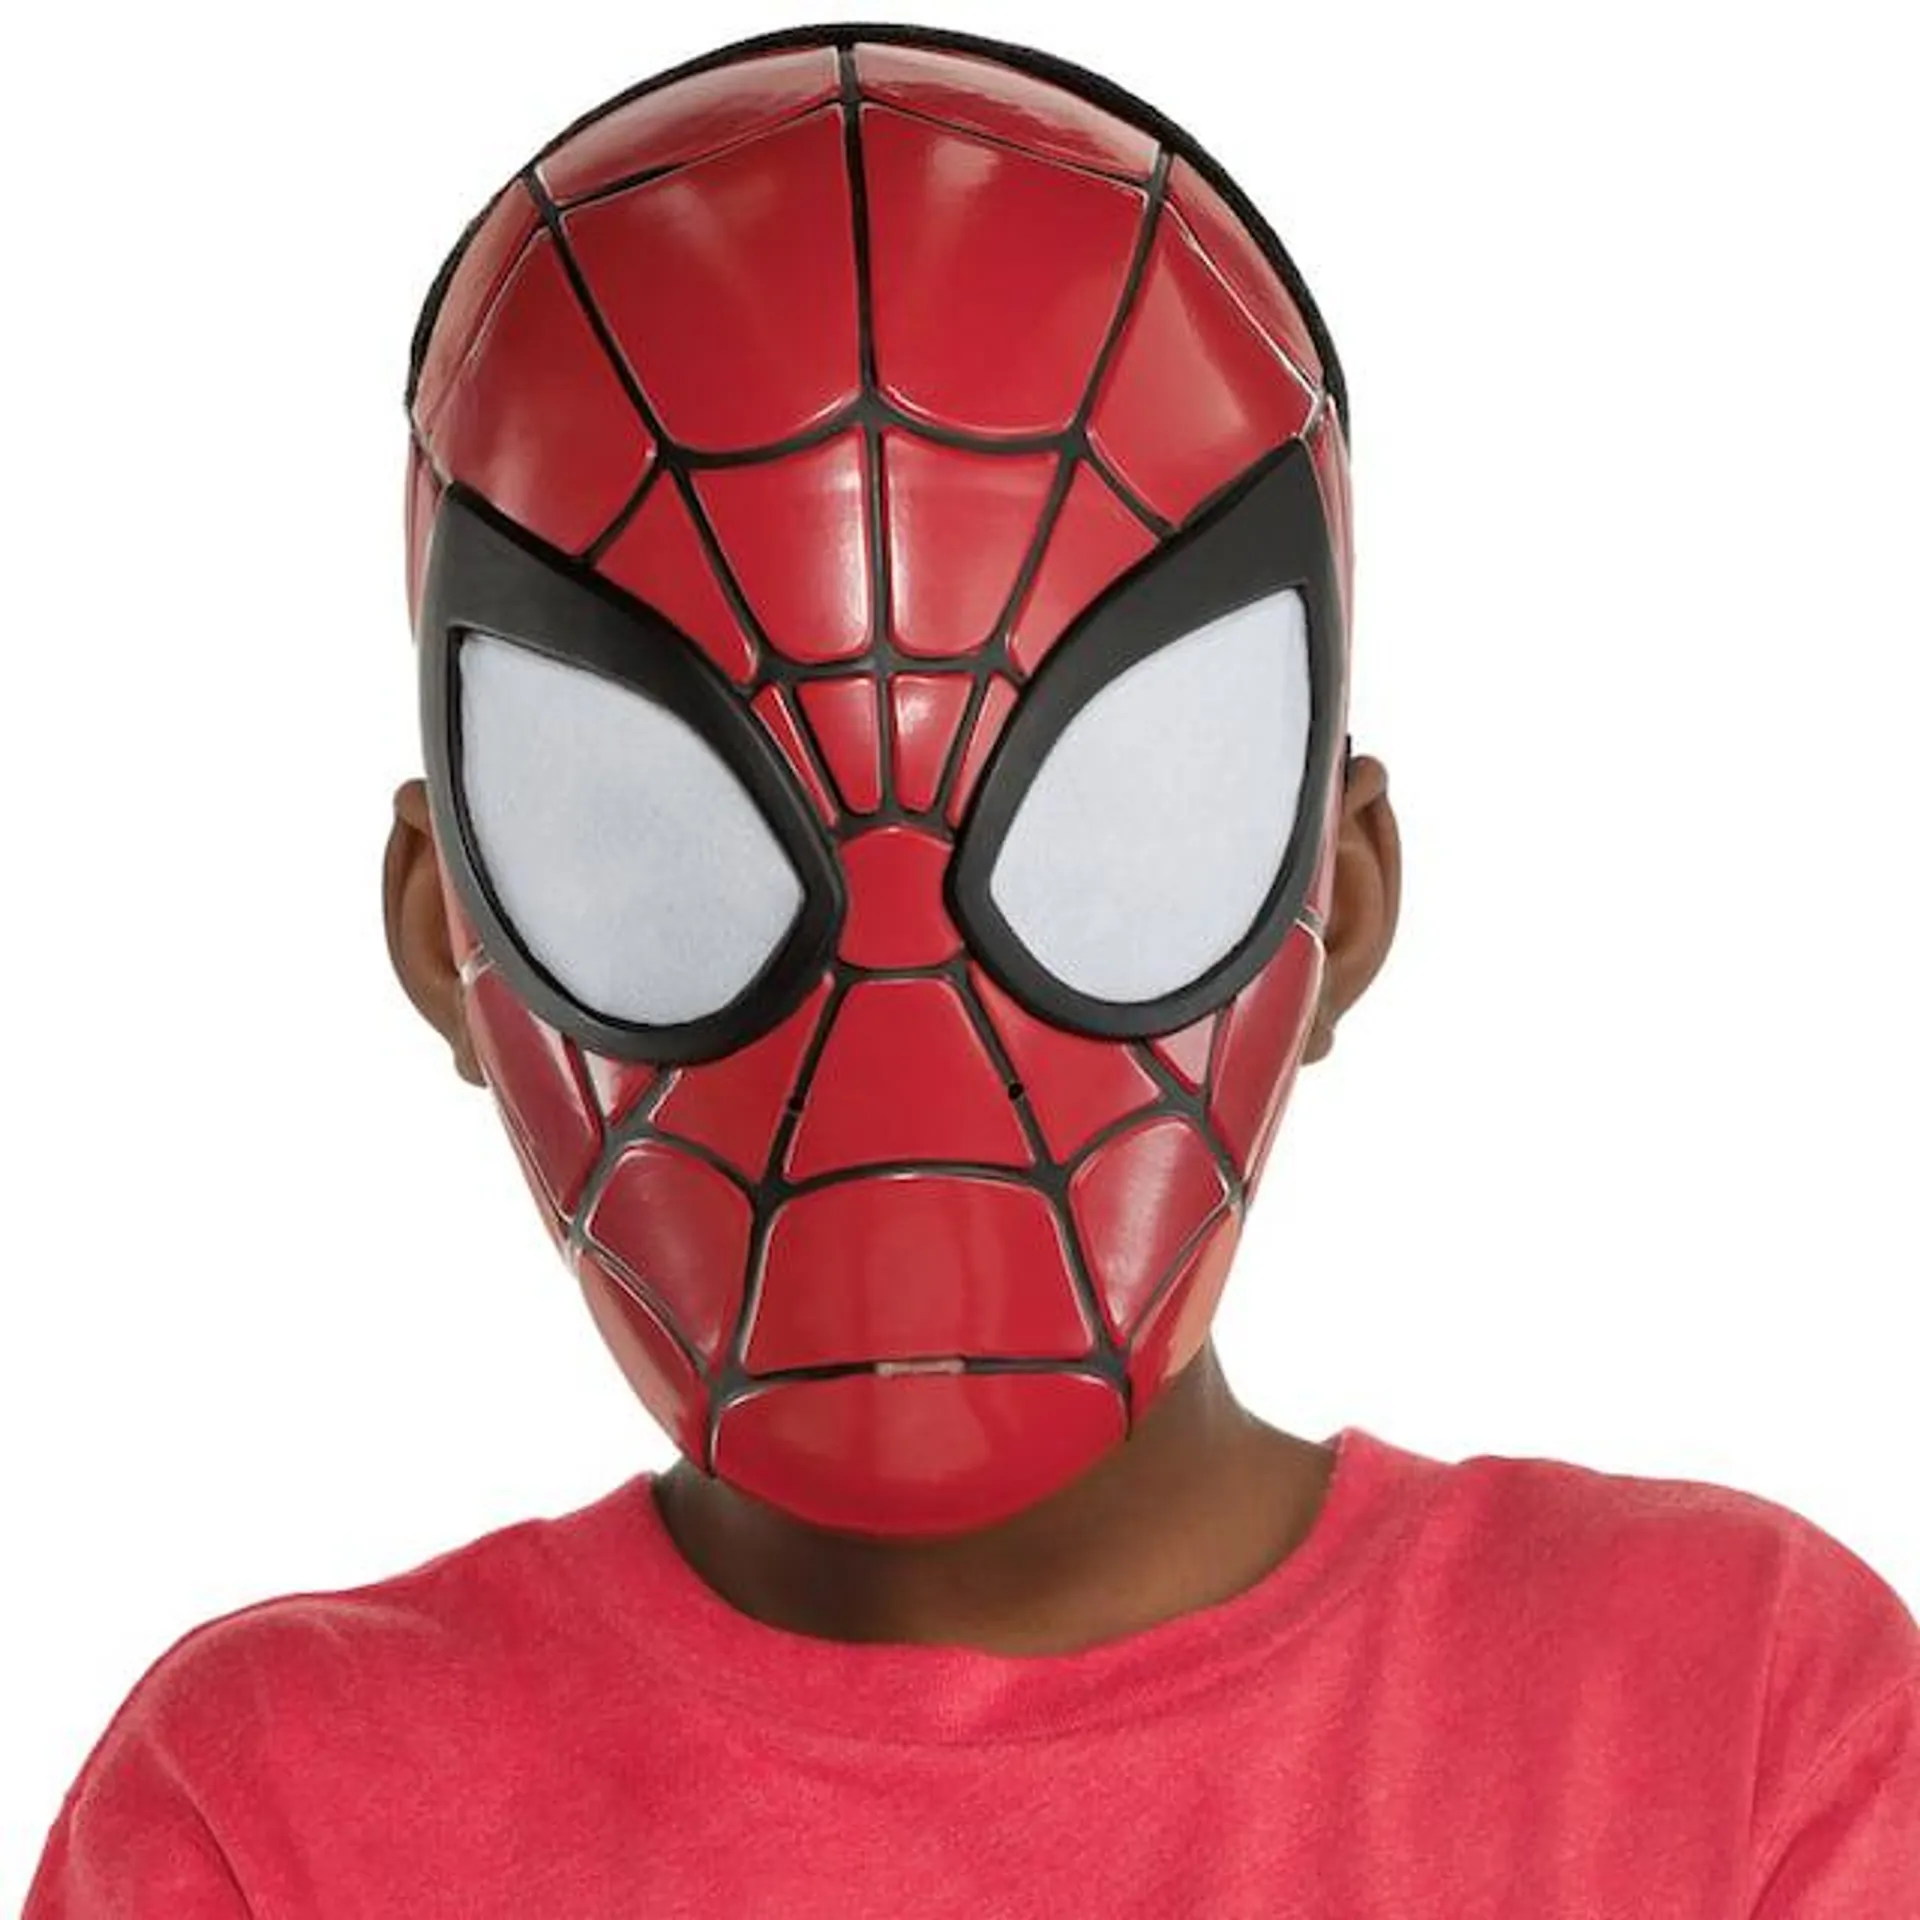 Disney Marvel Spider-Man Plastic Mask, Red/Black, One Size, Wearable Costume Accessory for Halloween